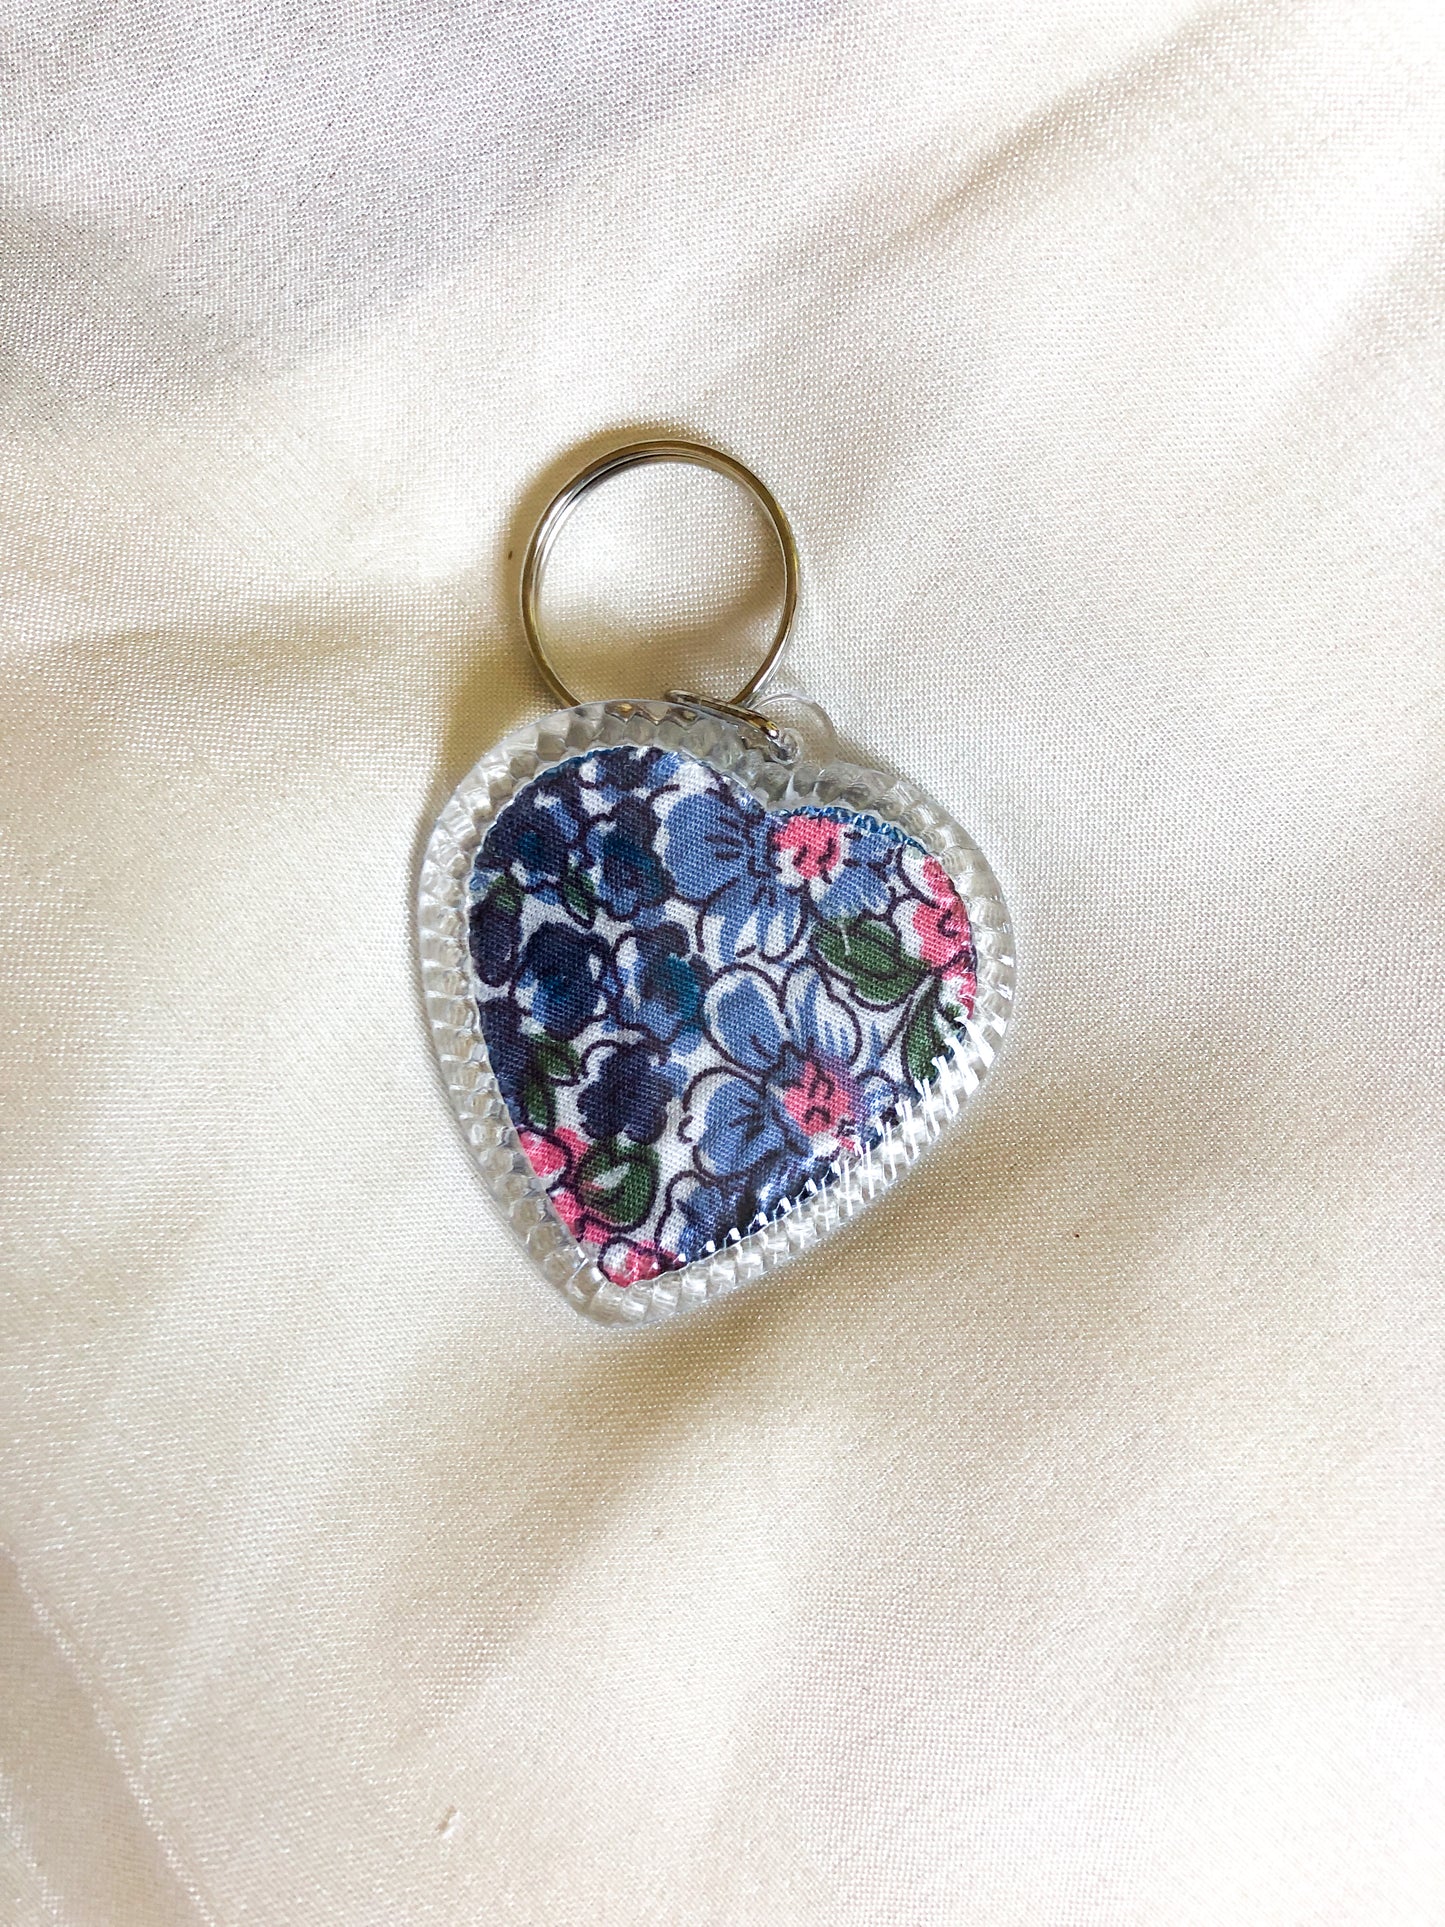 Heart Shaped Keyring - Blue and Denim Floral - Upcycled - Duo Design